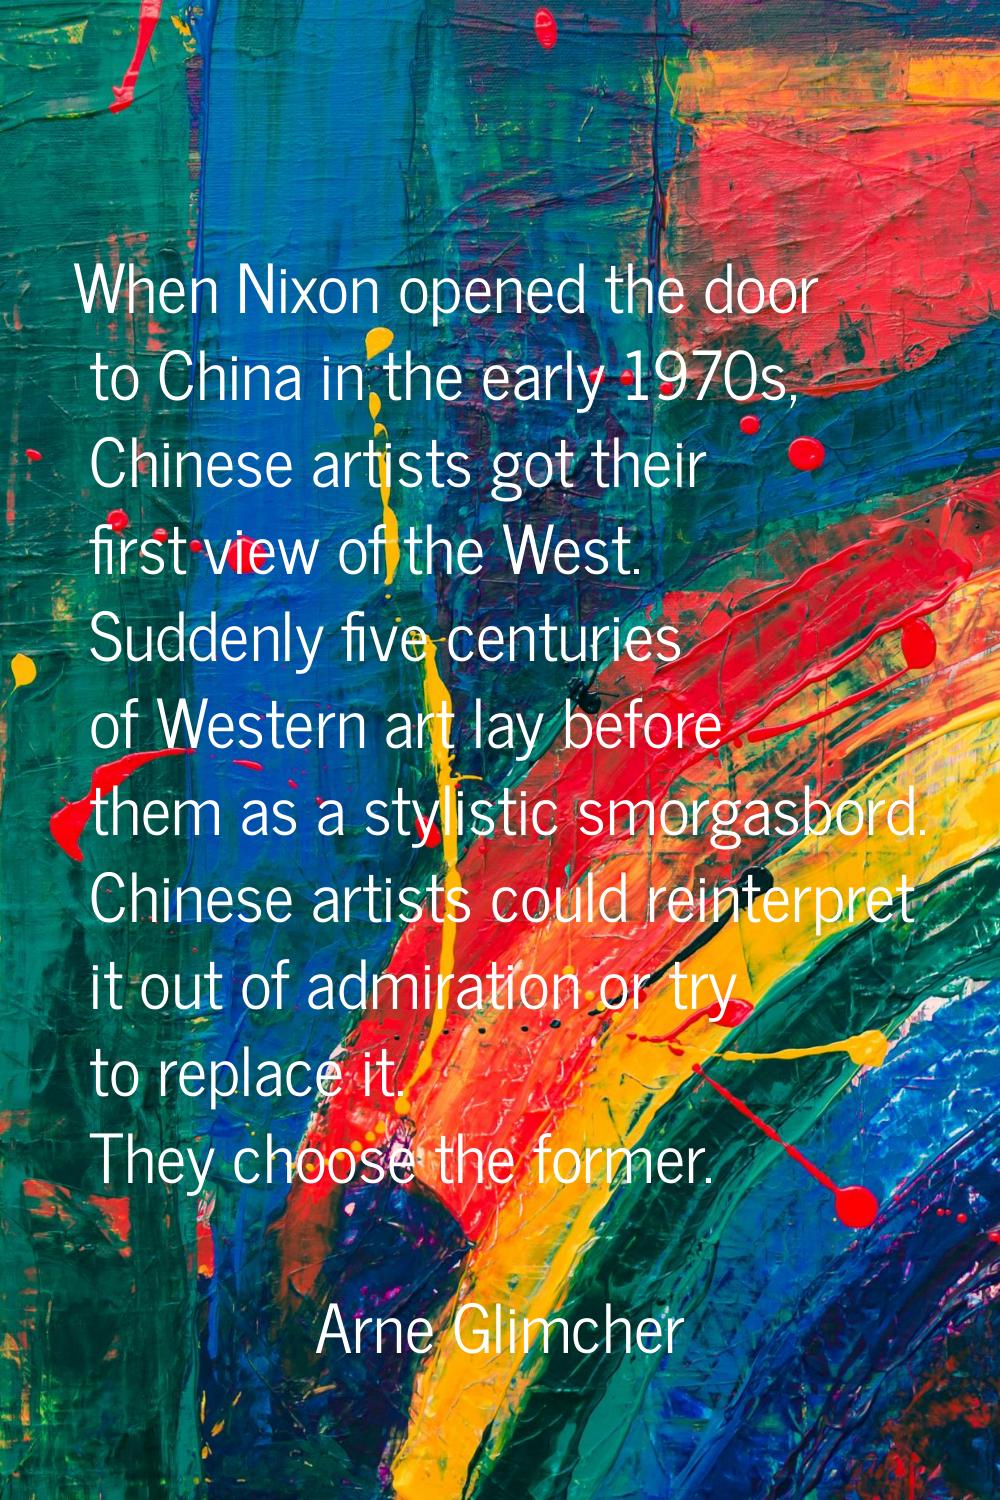 When Nixon opened the door to China in the early 1970s, Chinese artists got their first view of the